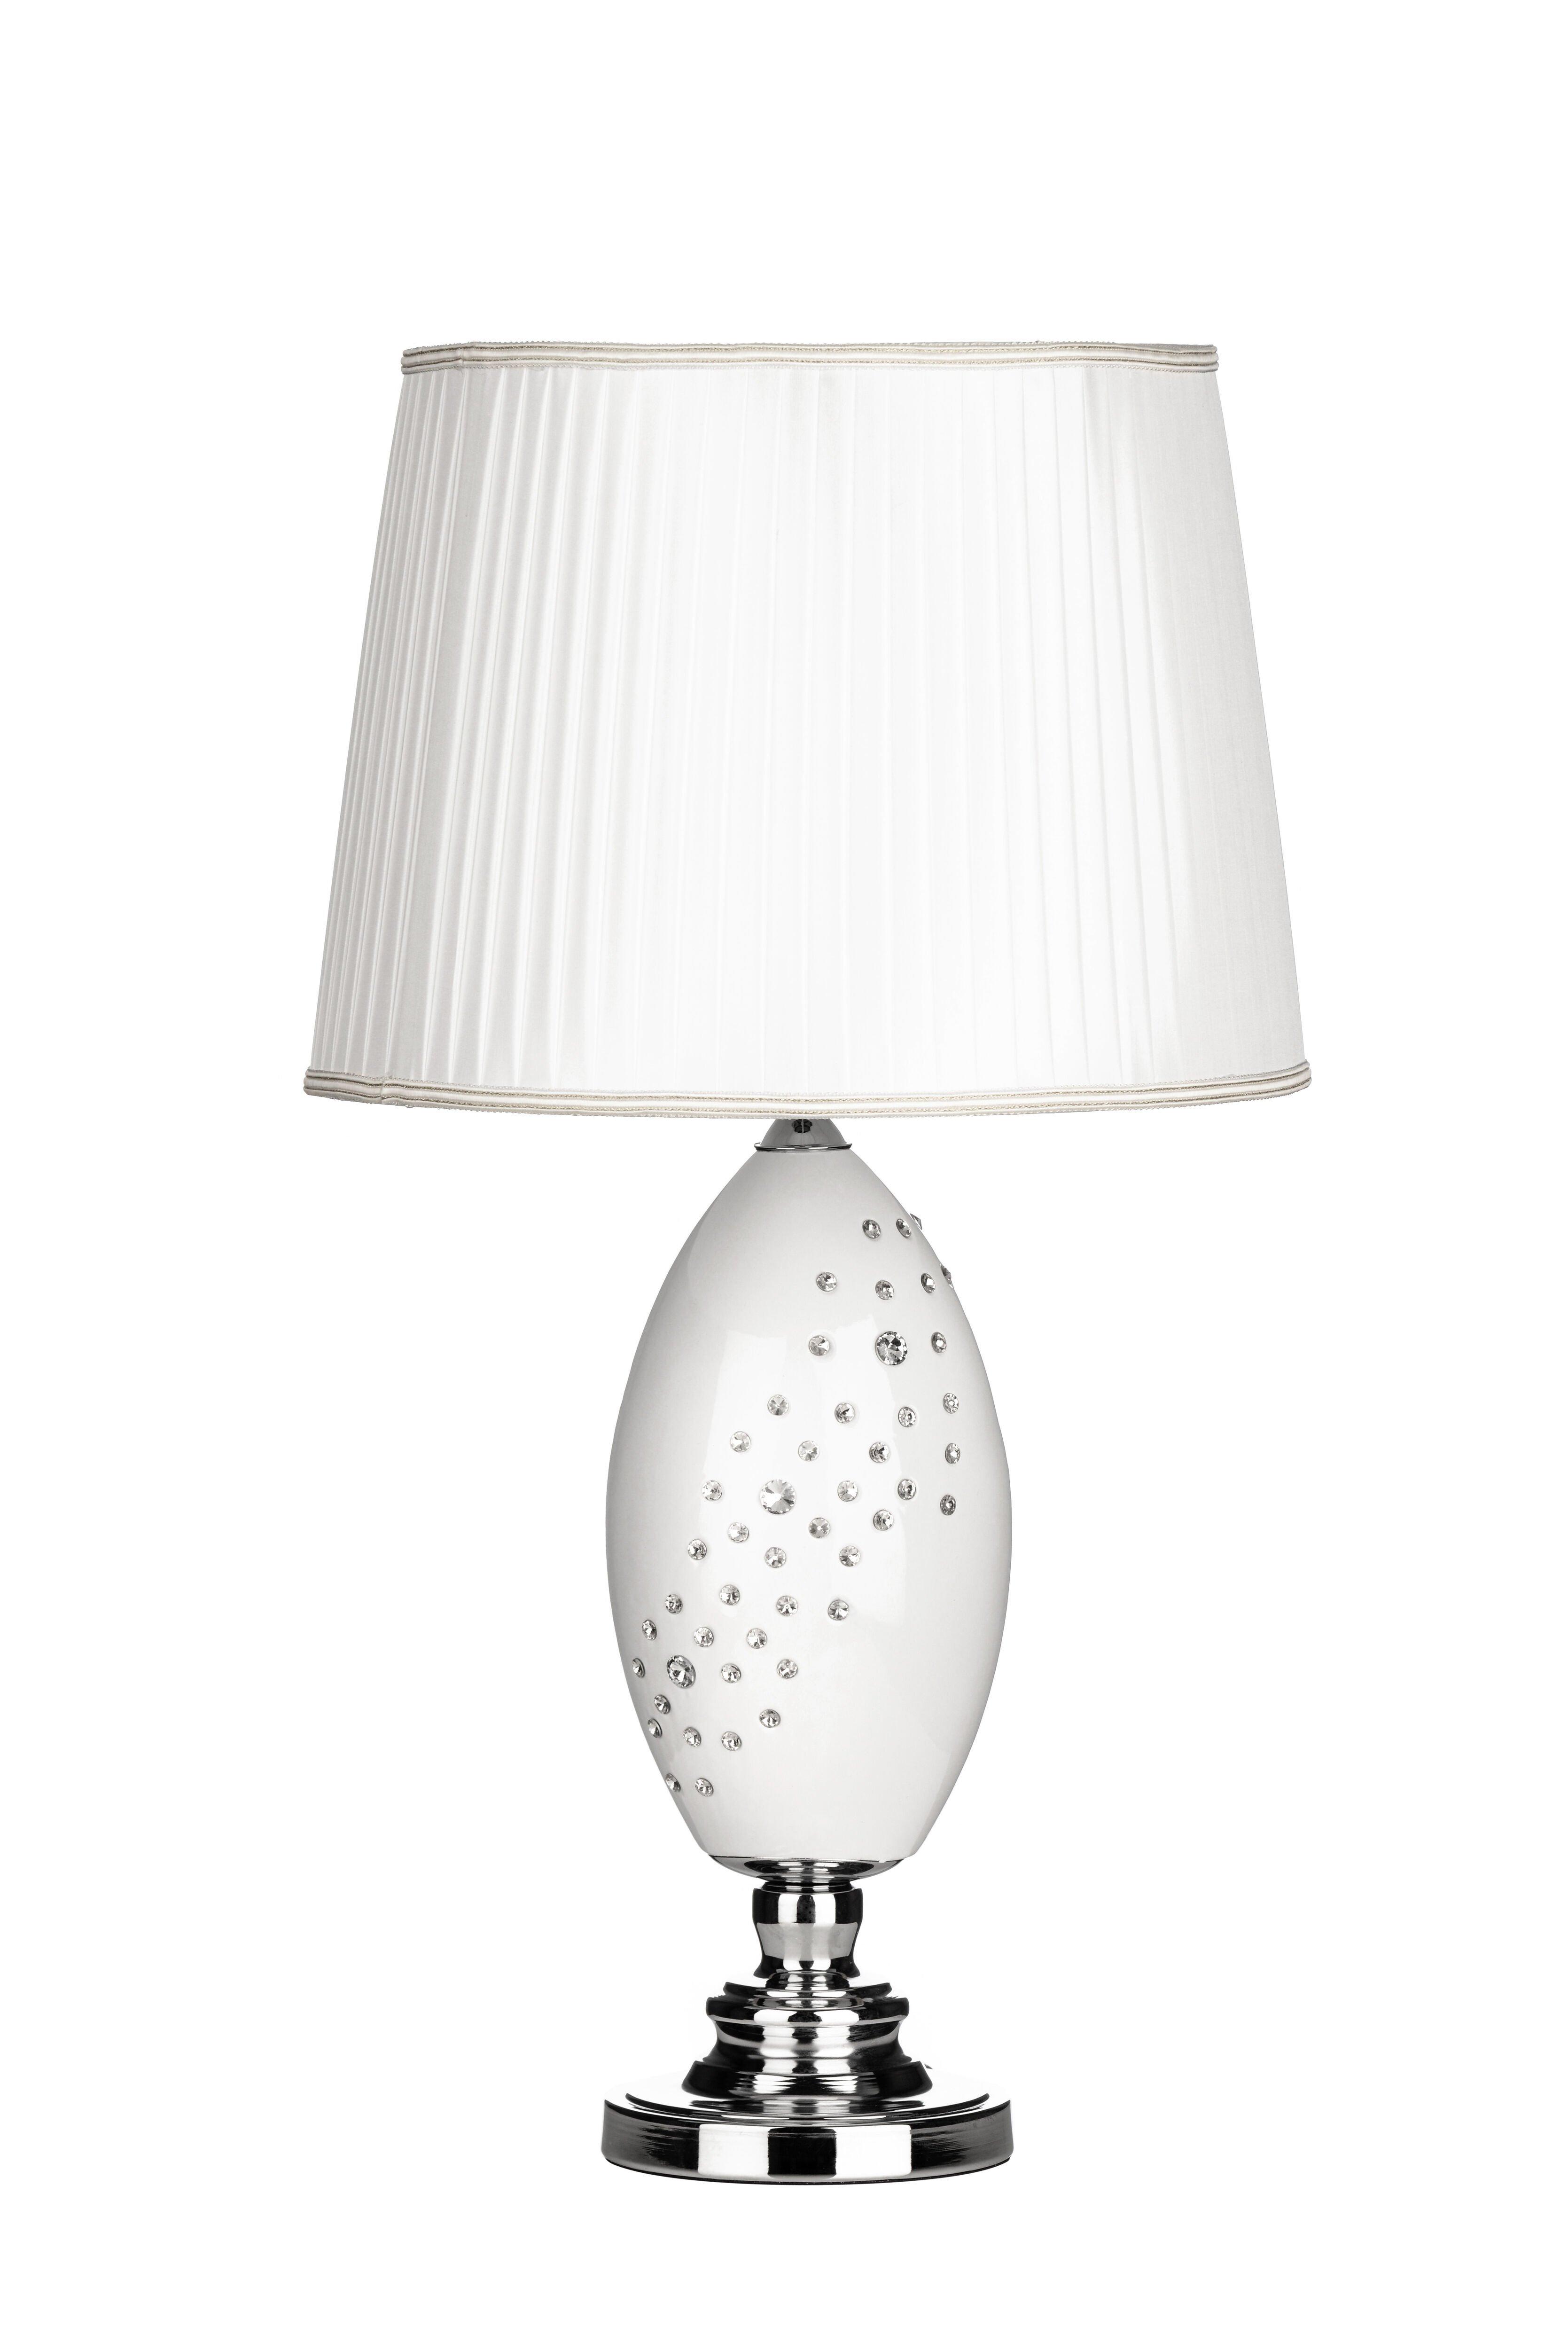 Interiors by Premier Maisy Table Lamp